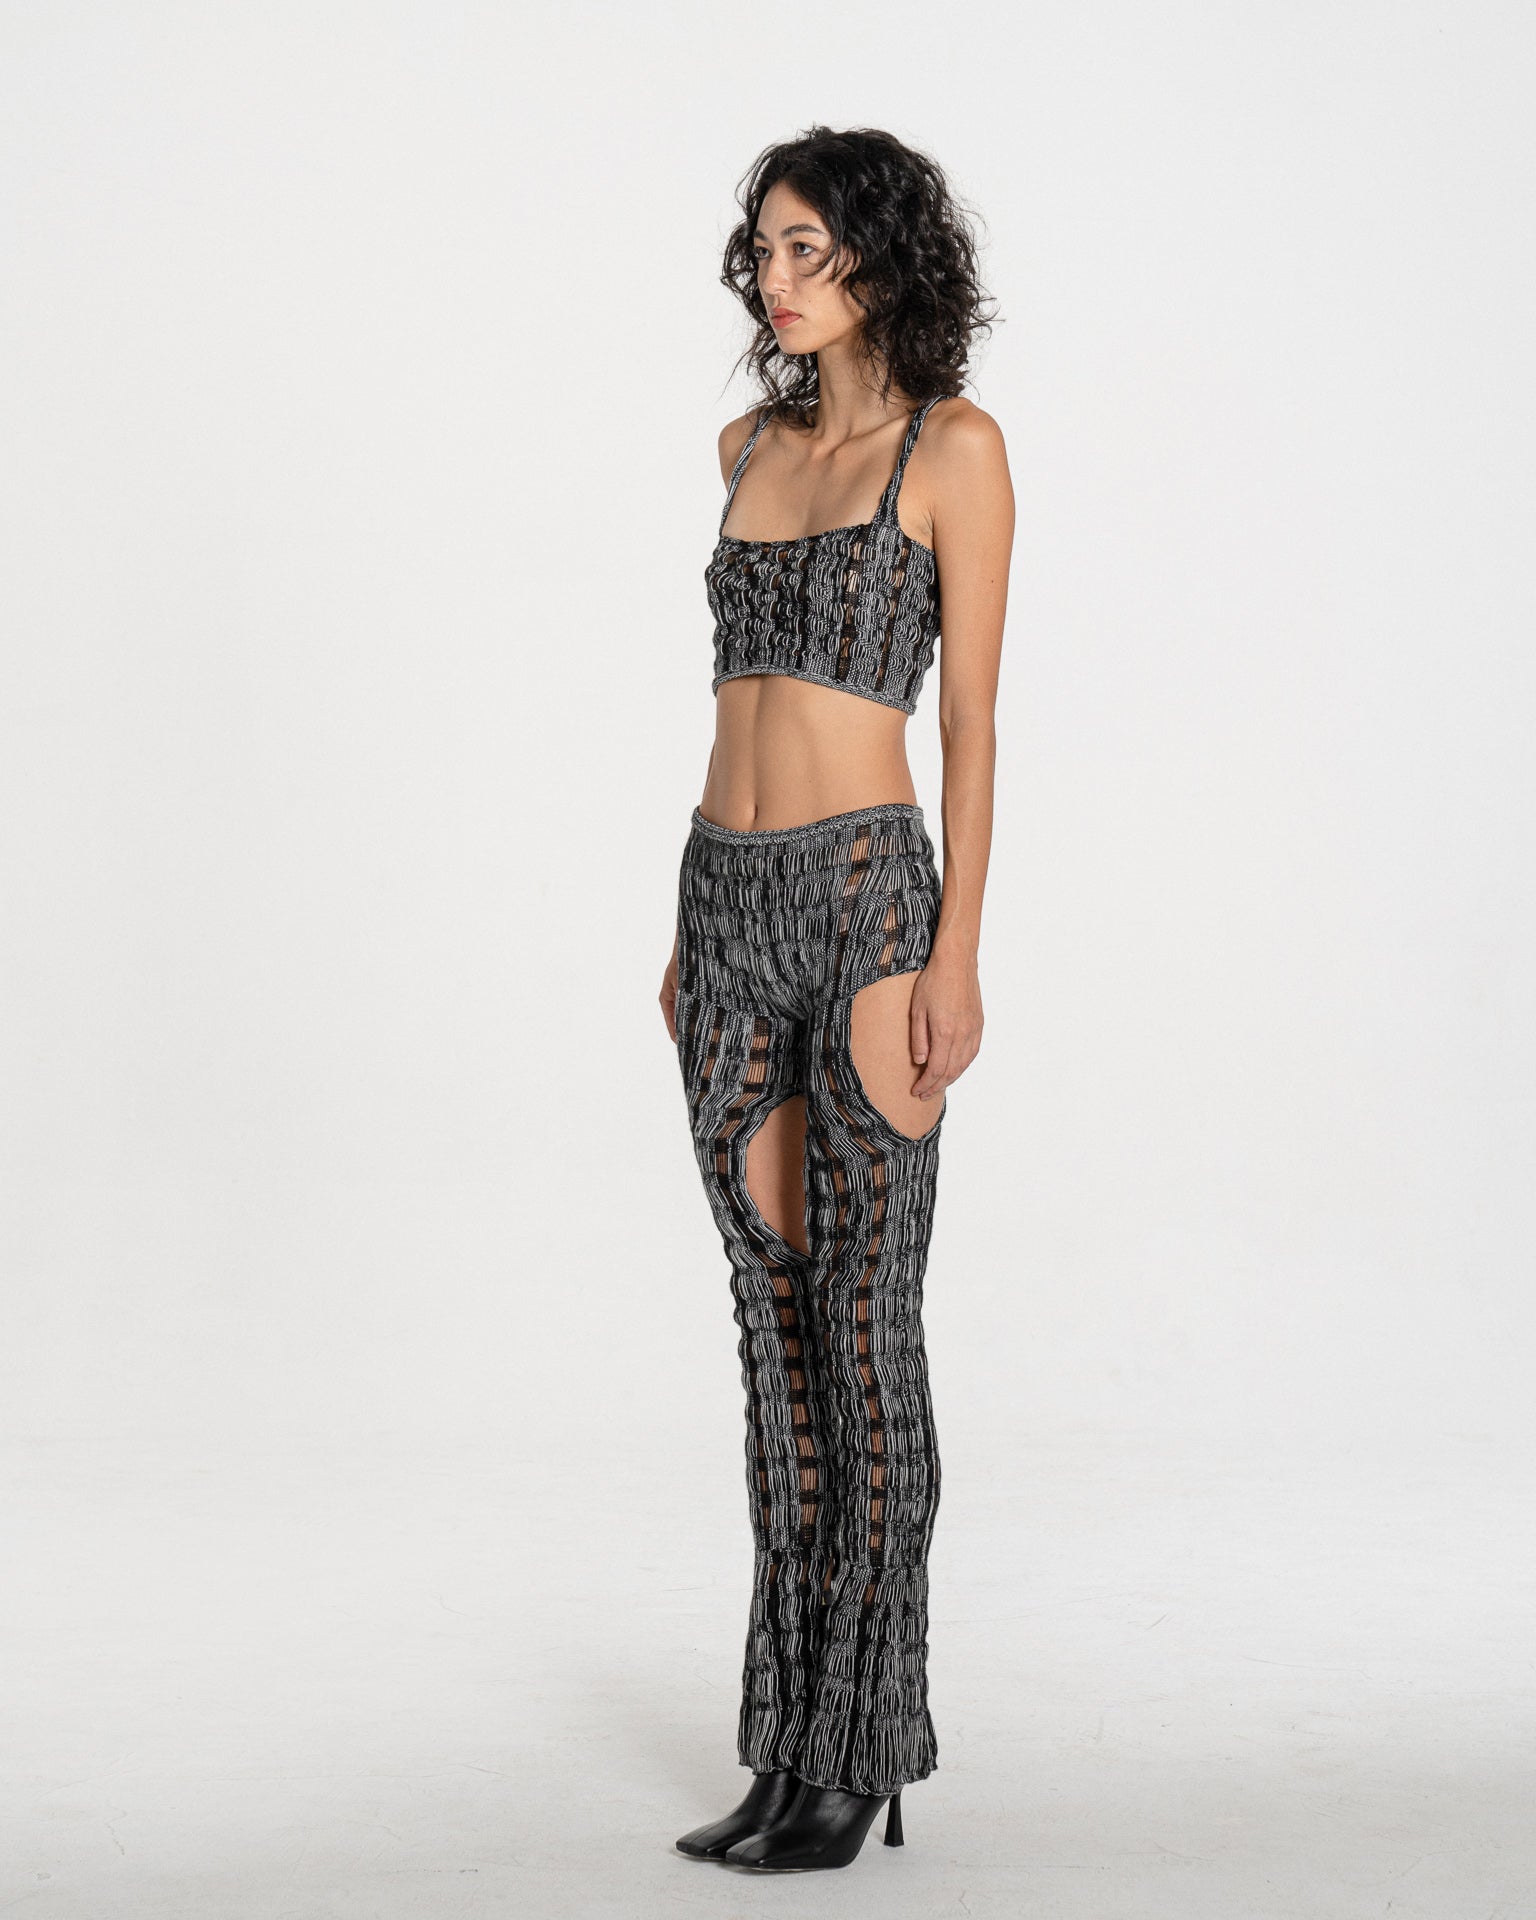 Hand Knit Grid Cut-out Trouser [Made-to-order]